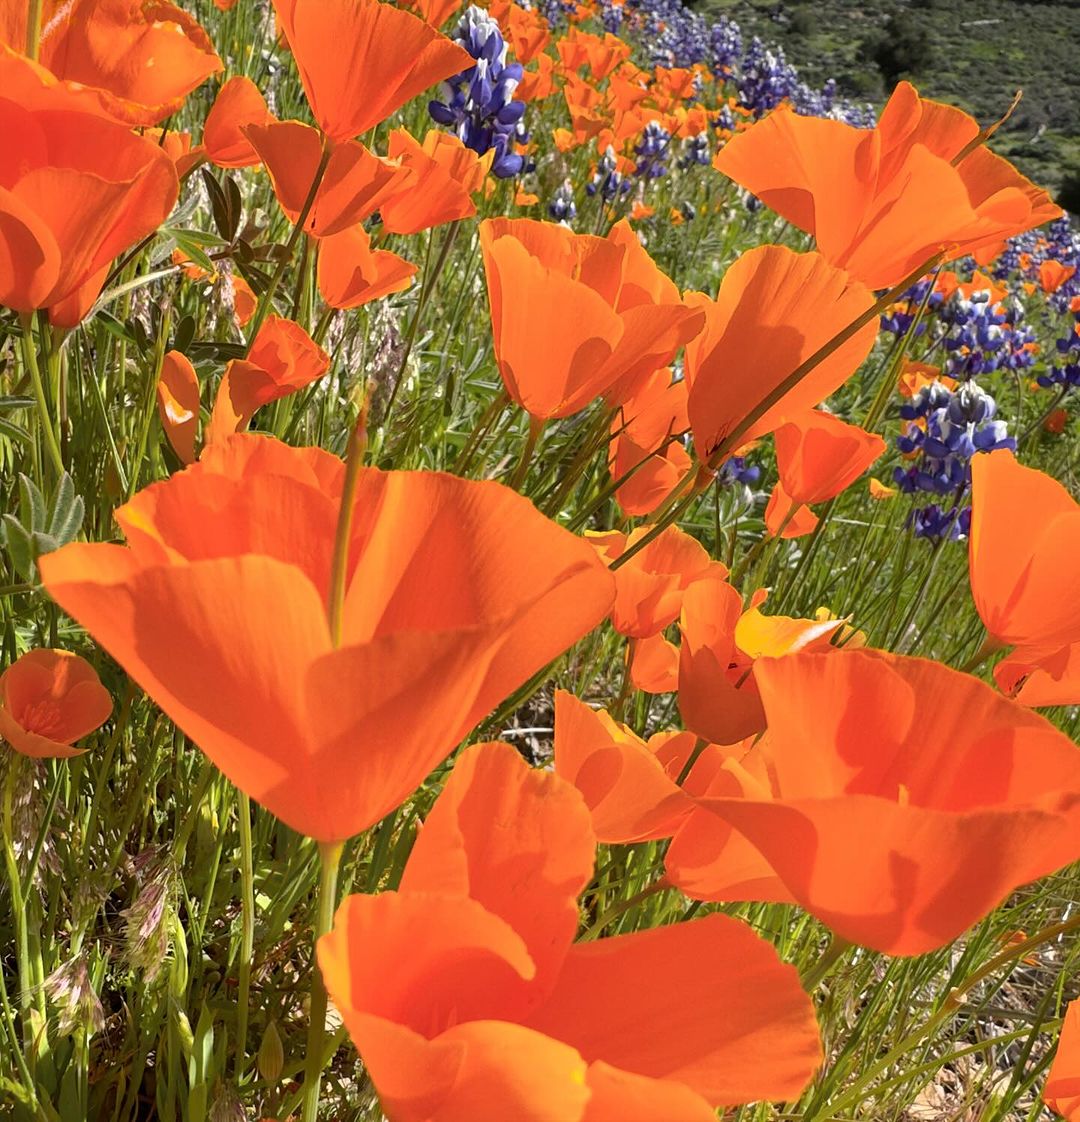 Spring is in bloom all over the Santa Ynez Valley. These beautiful poppies and lupine were captured on Figueroa Mountain, the perfect spot for a hike. Learn more about outdoor activities in the SYV: bit.ly/3VXgI6M 📸: chuckplace